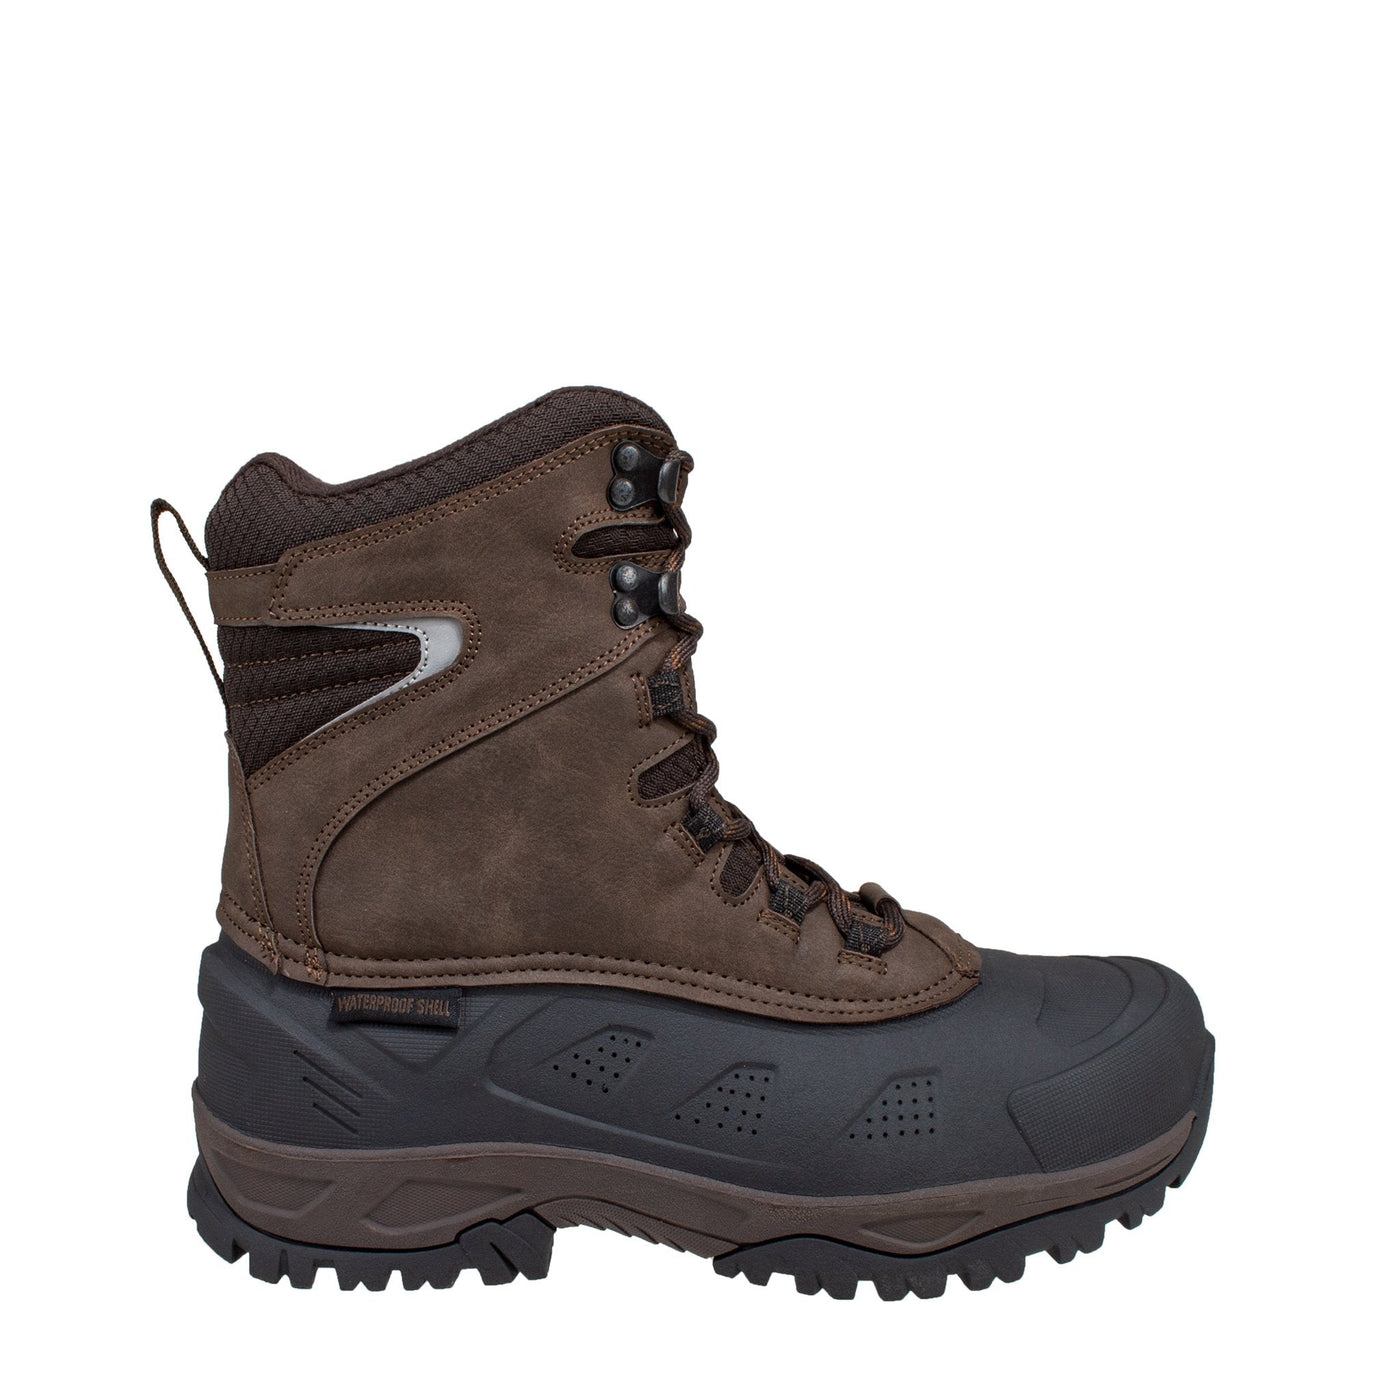 brown men's insulated winter boots